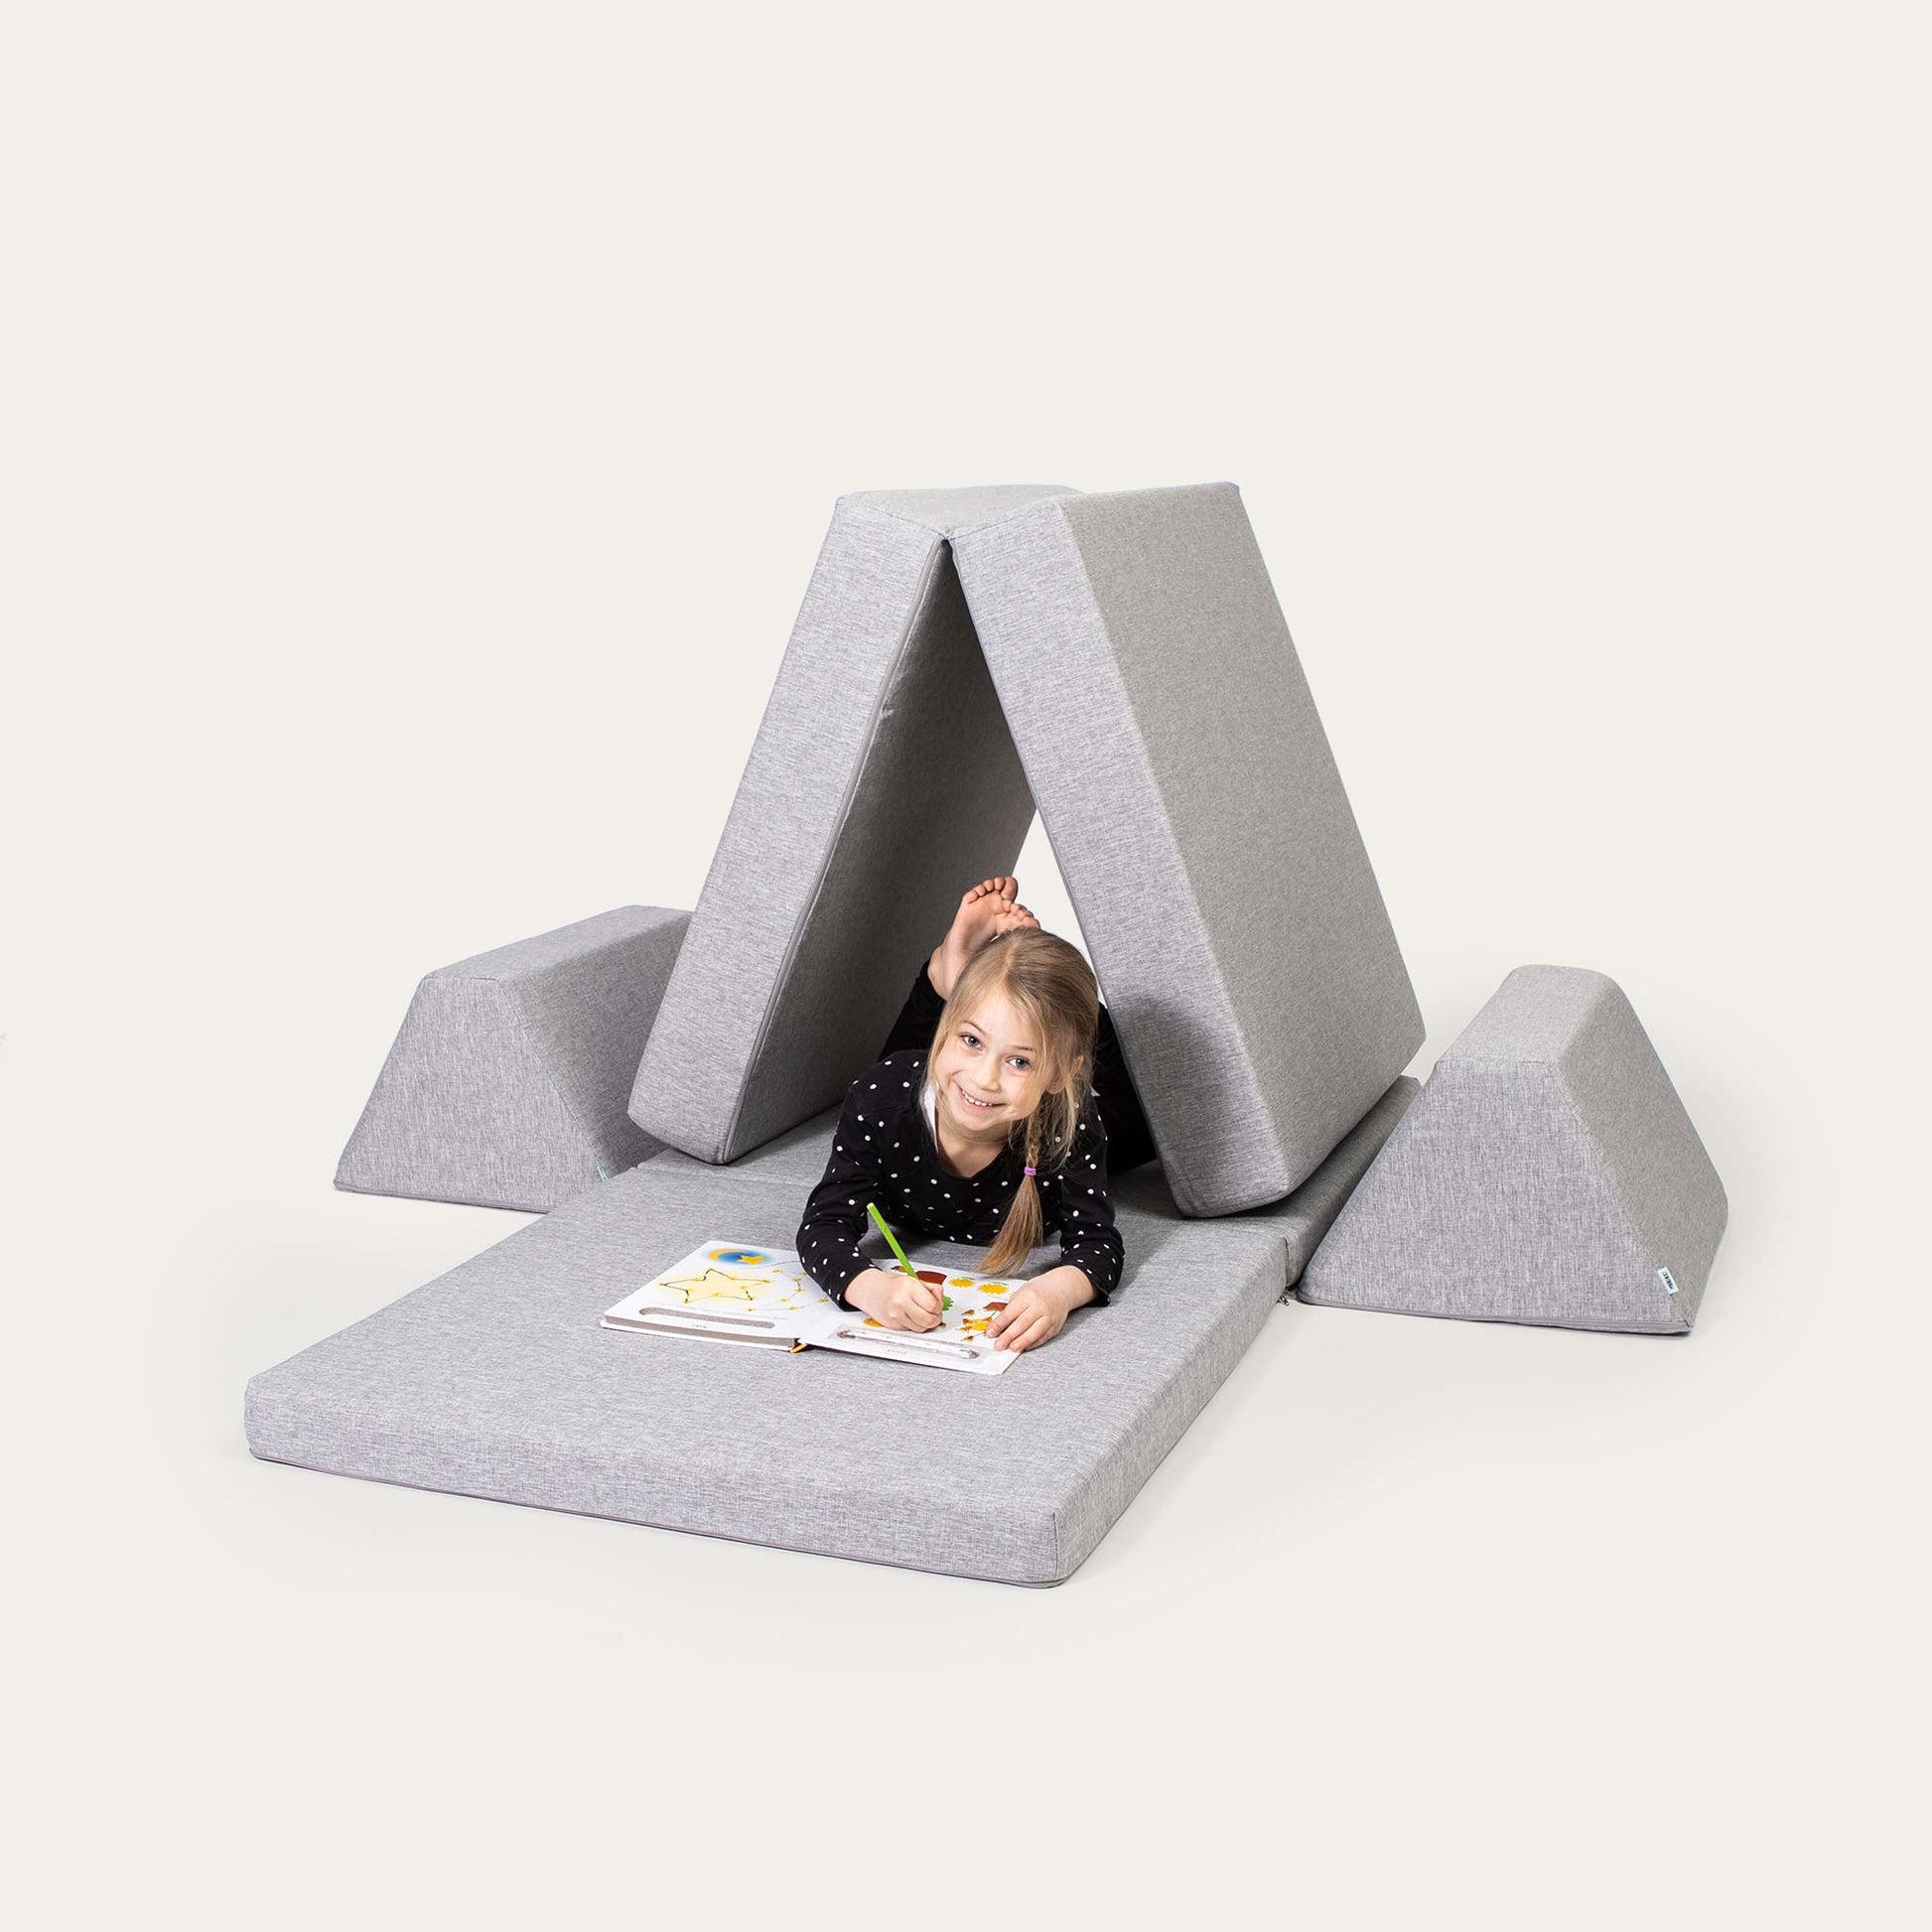 A little girl drawing in a coloring book while sleeping on a grey triangle-shaped Monboxy activity sofa